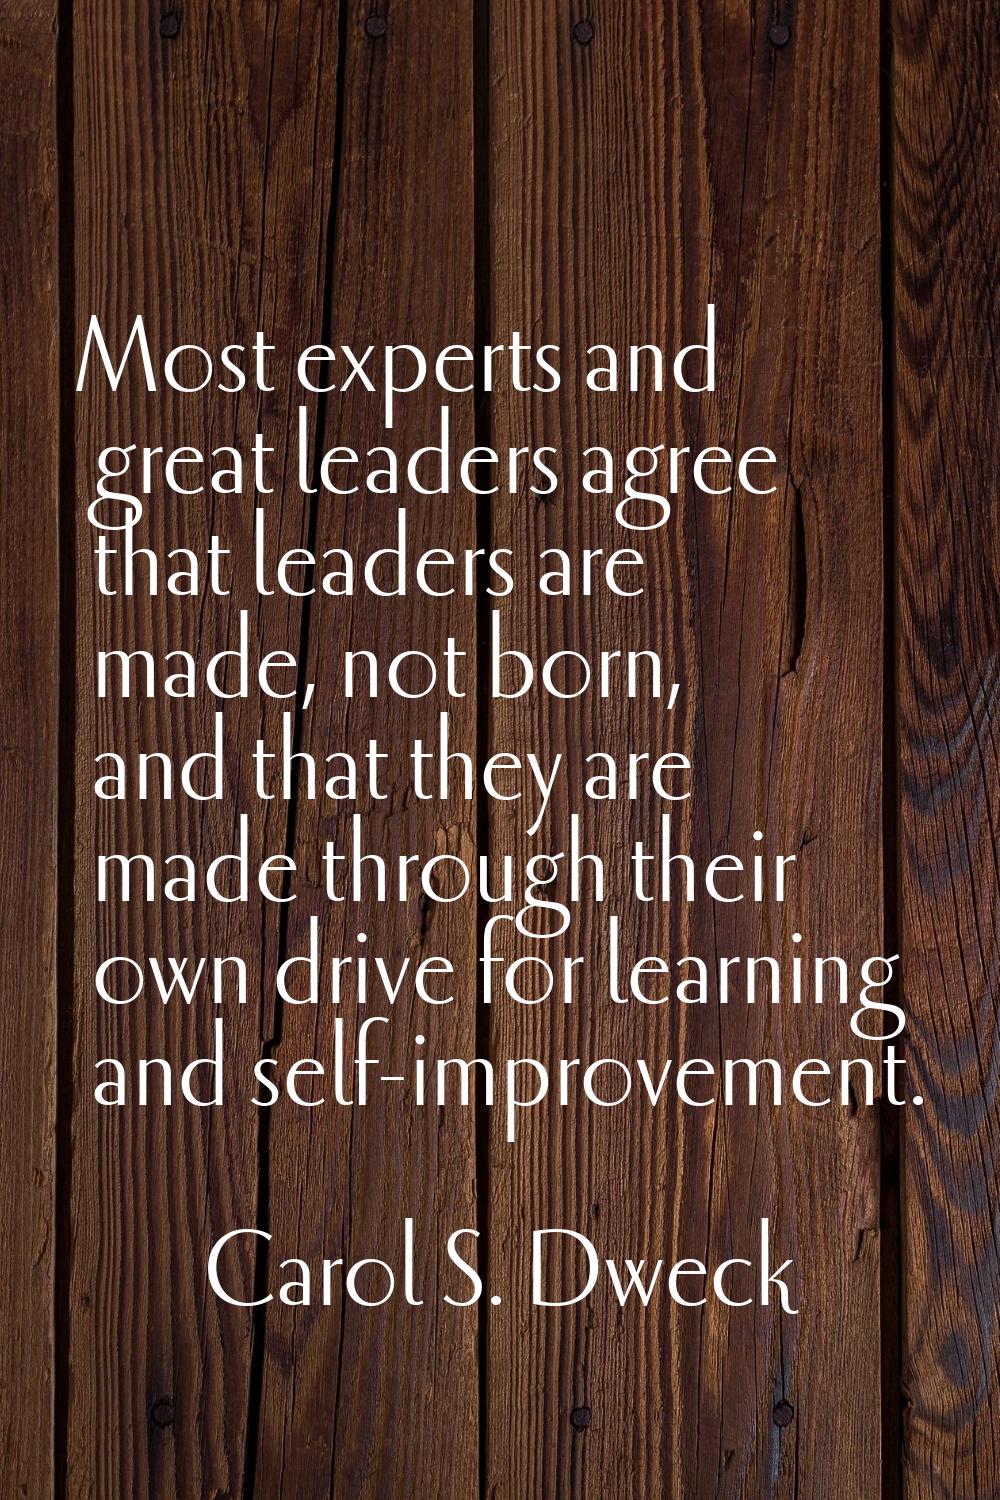 Most experts and great leaders agree that leaders are made, not born, and that they are made throug